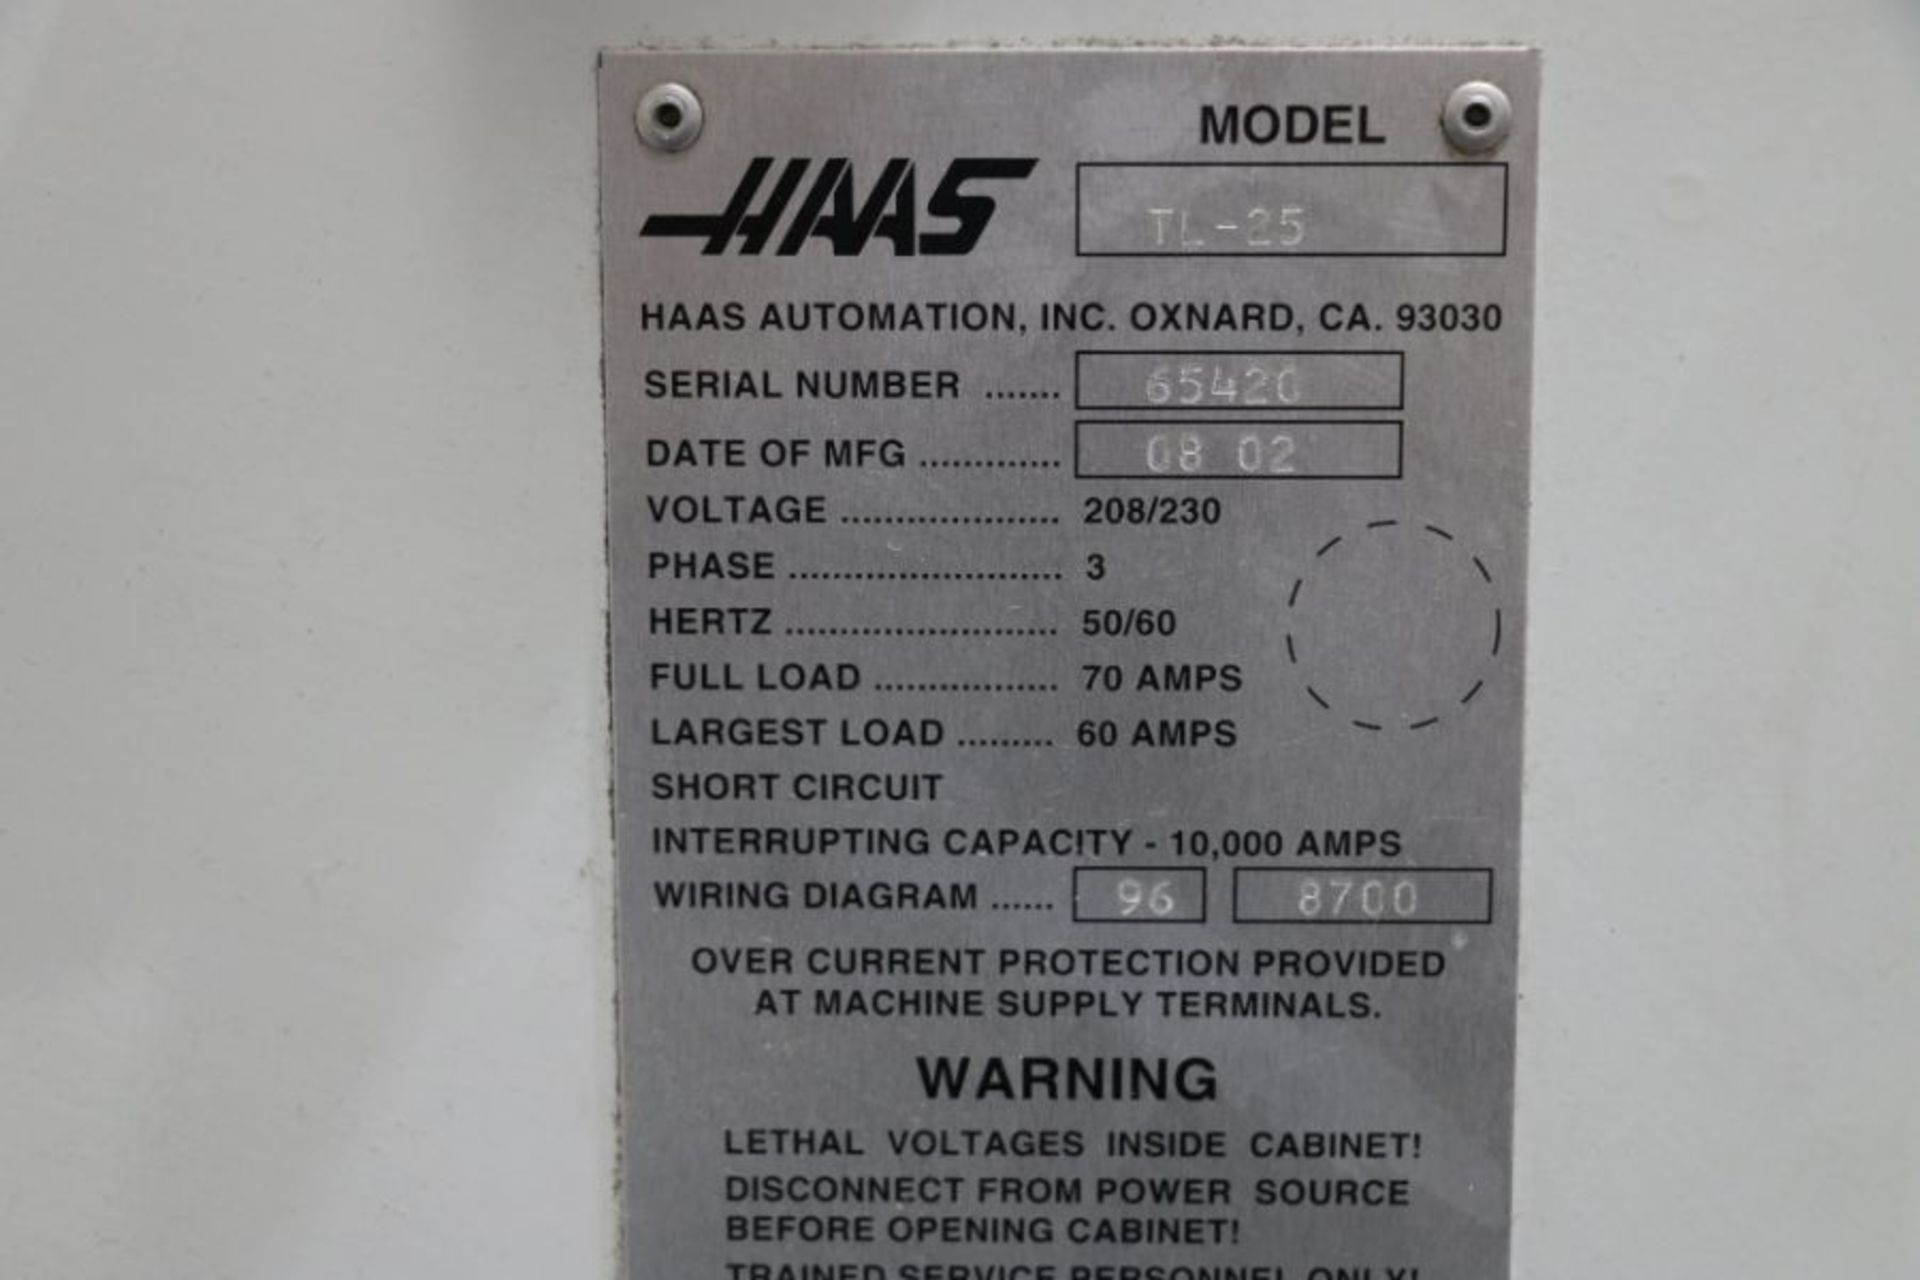 Haas TL-25 CNC Lathe, Collet Nose, 12 Position Turret, s/n 65420, New 2002 - Image 9 of 9